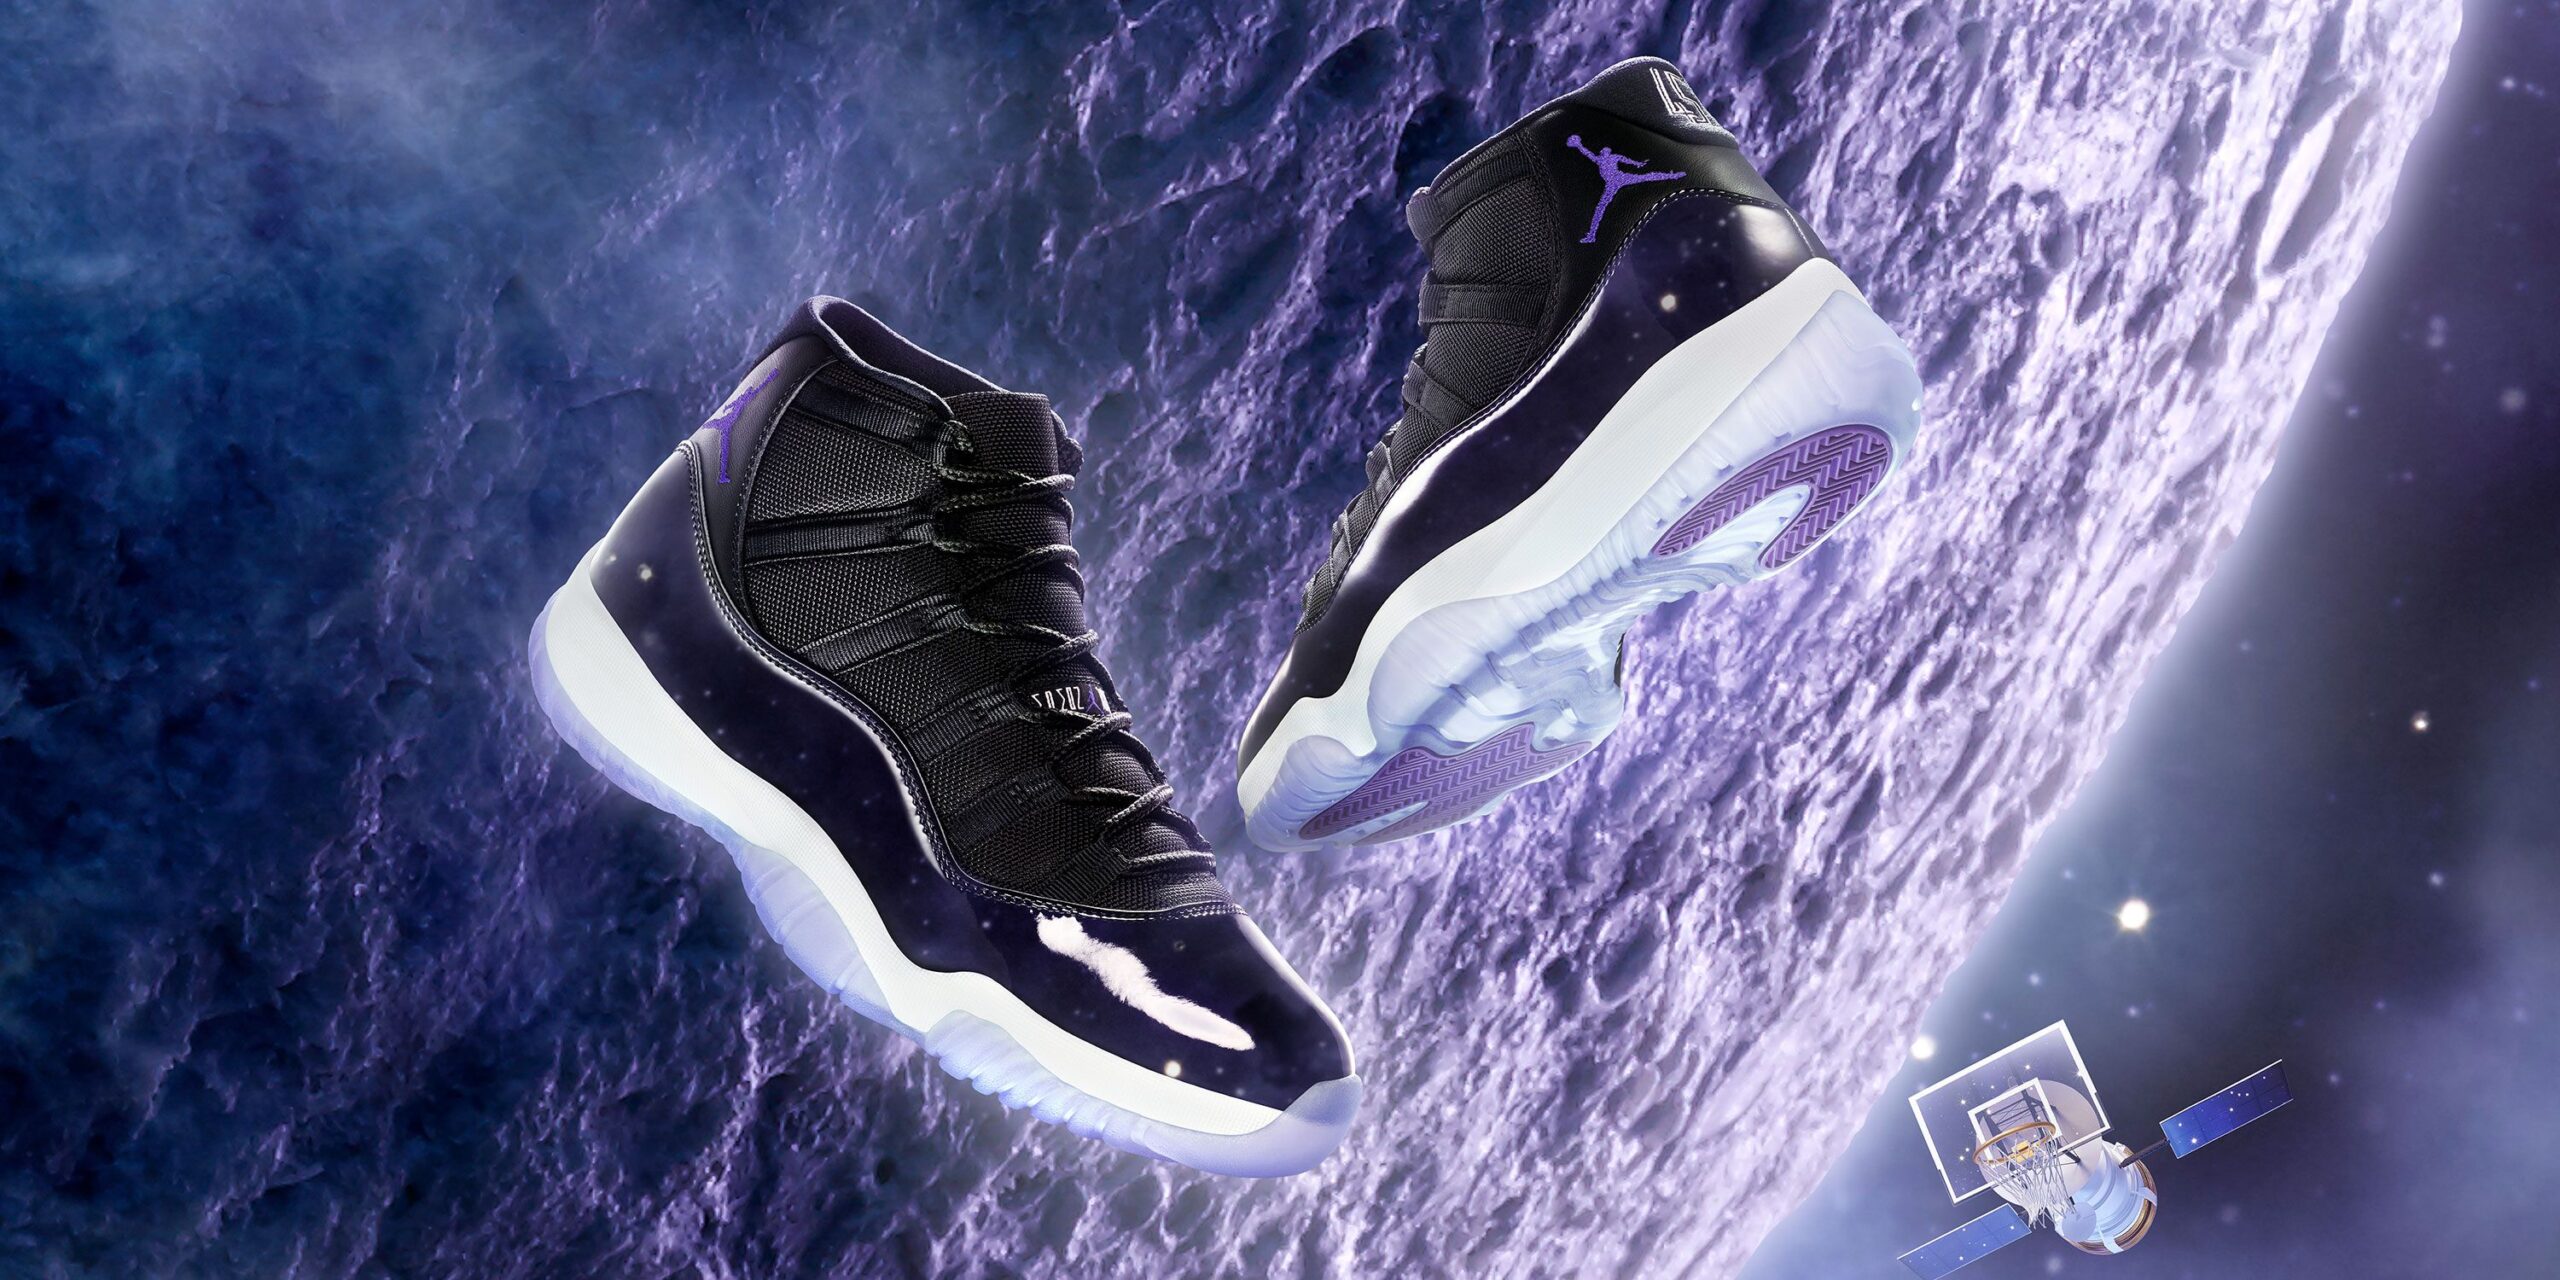 The The Air Jordan 13 dropped earlier this summer in the dropped earlier this summer in the1 Space Jam history